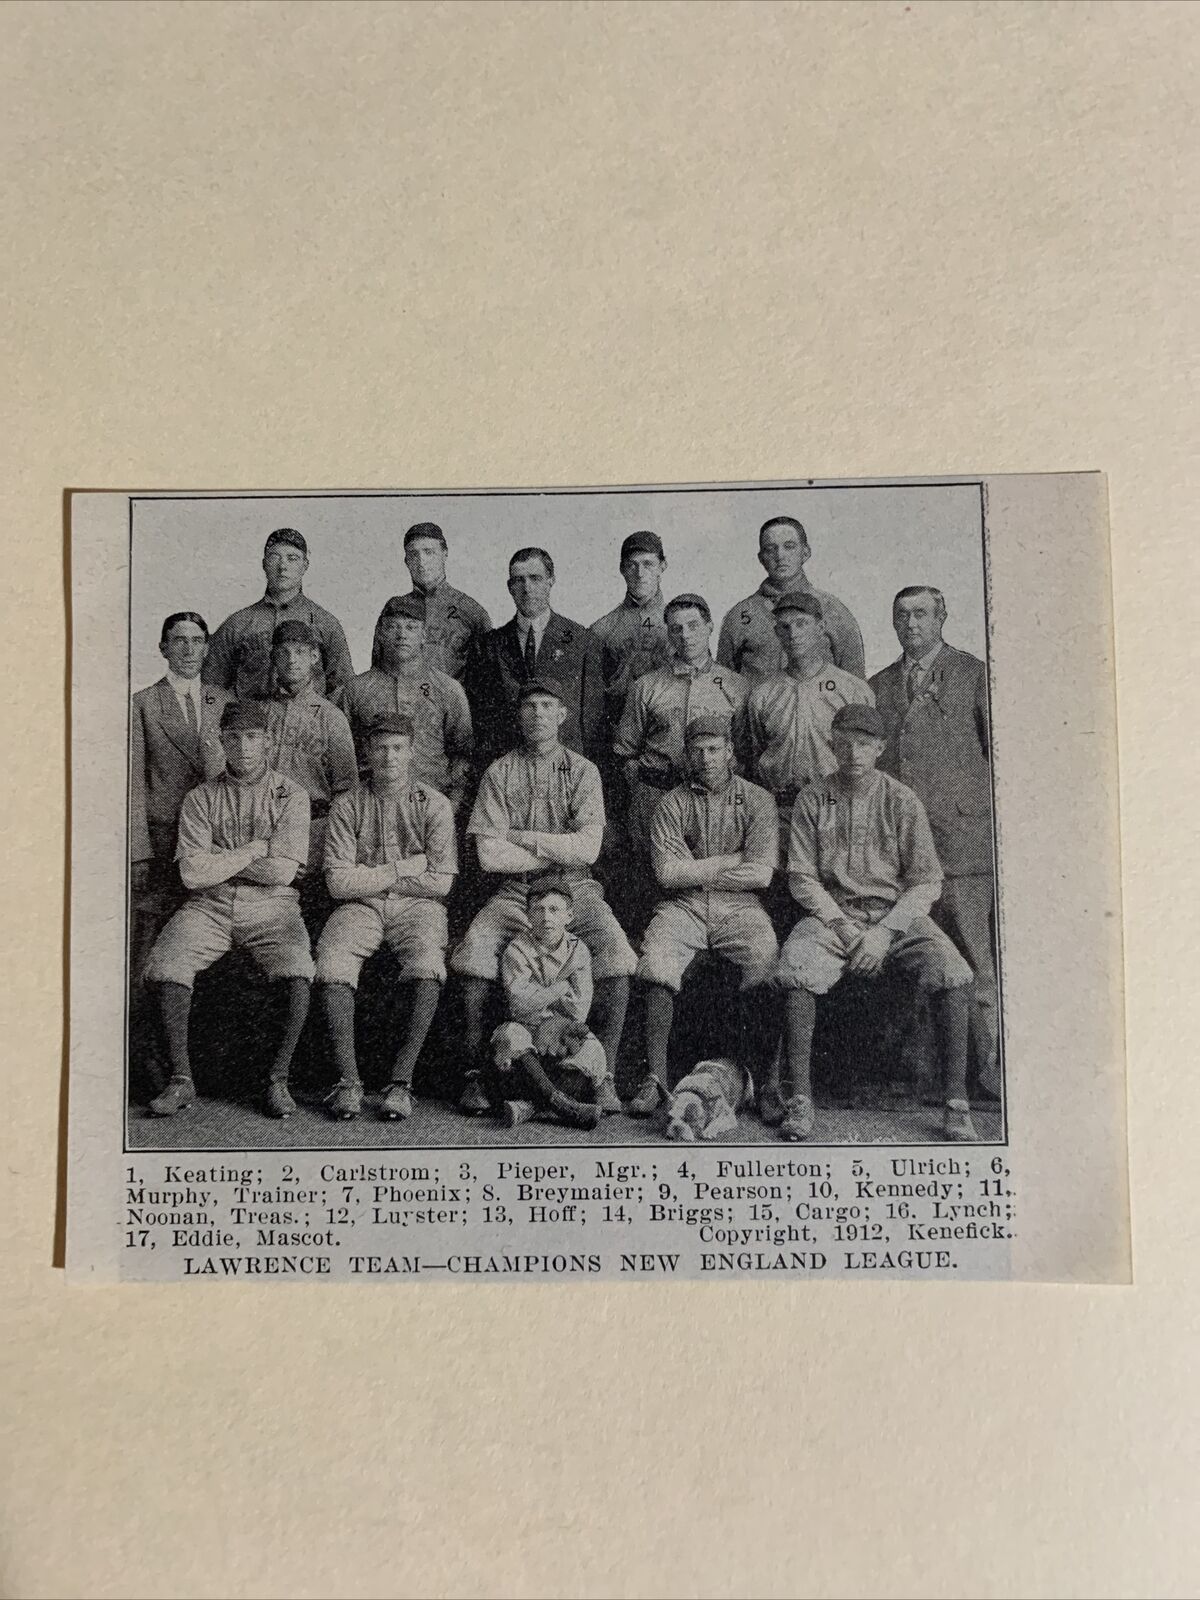 Lawrence Barristers New England Lg. Ray Keating 1912 Baseball Team Picture #2